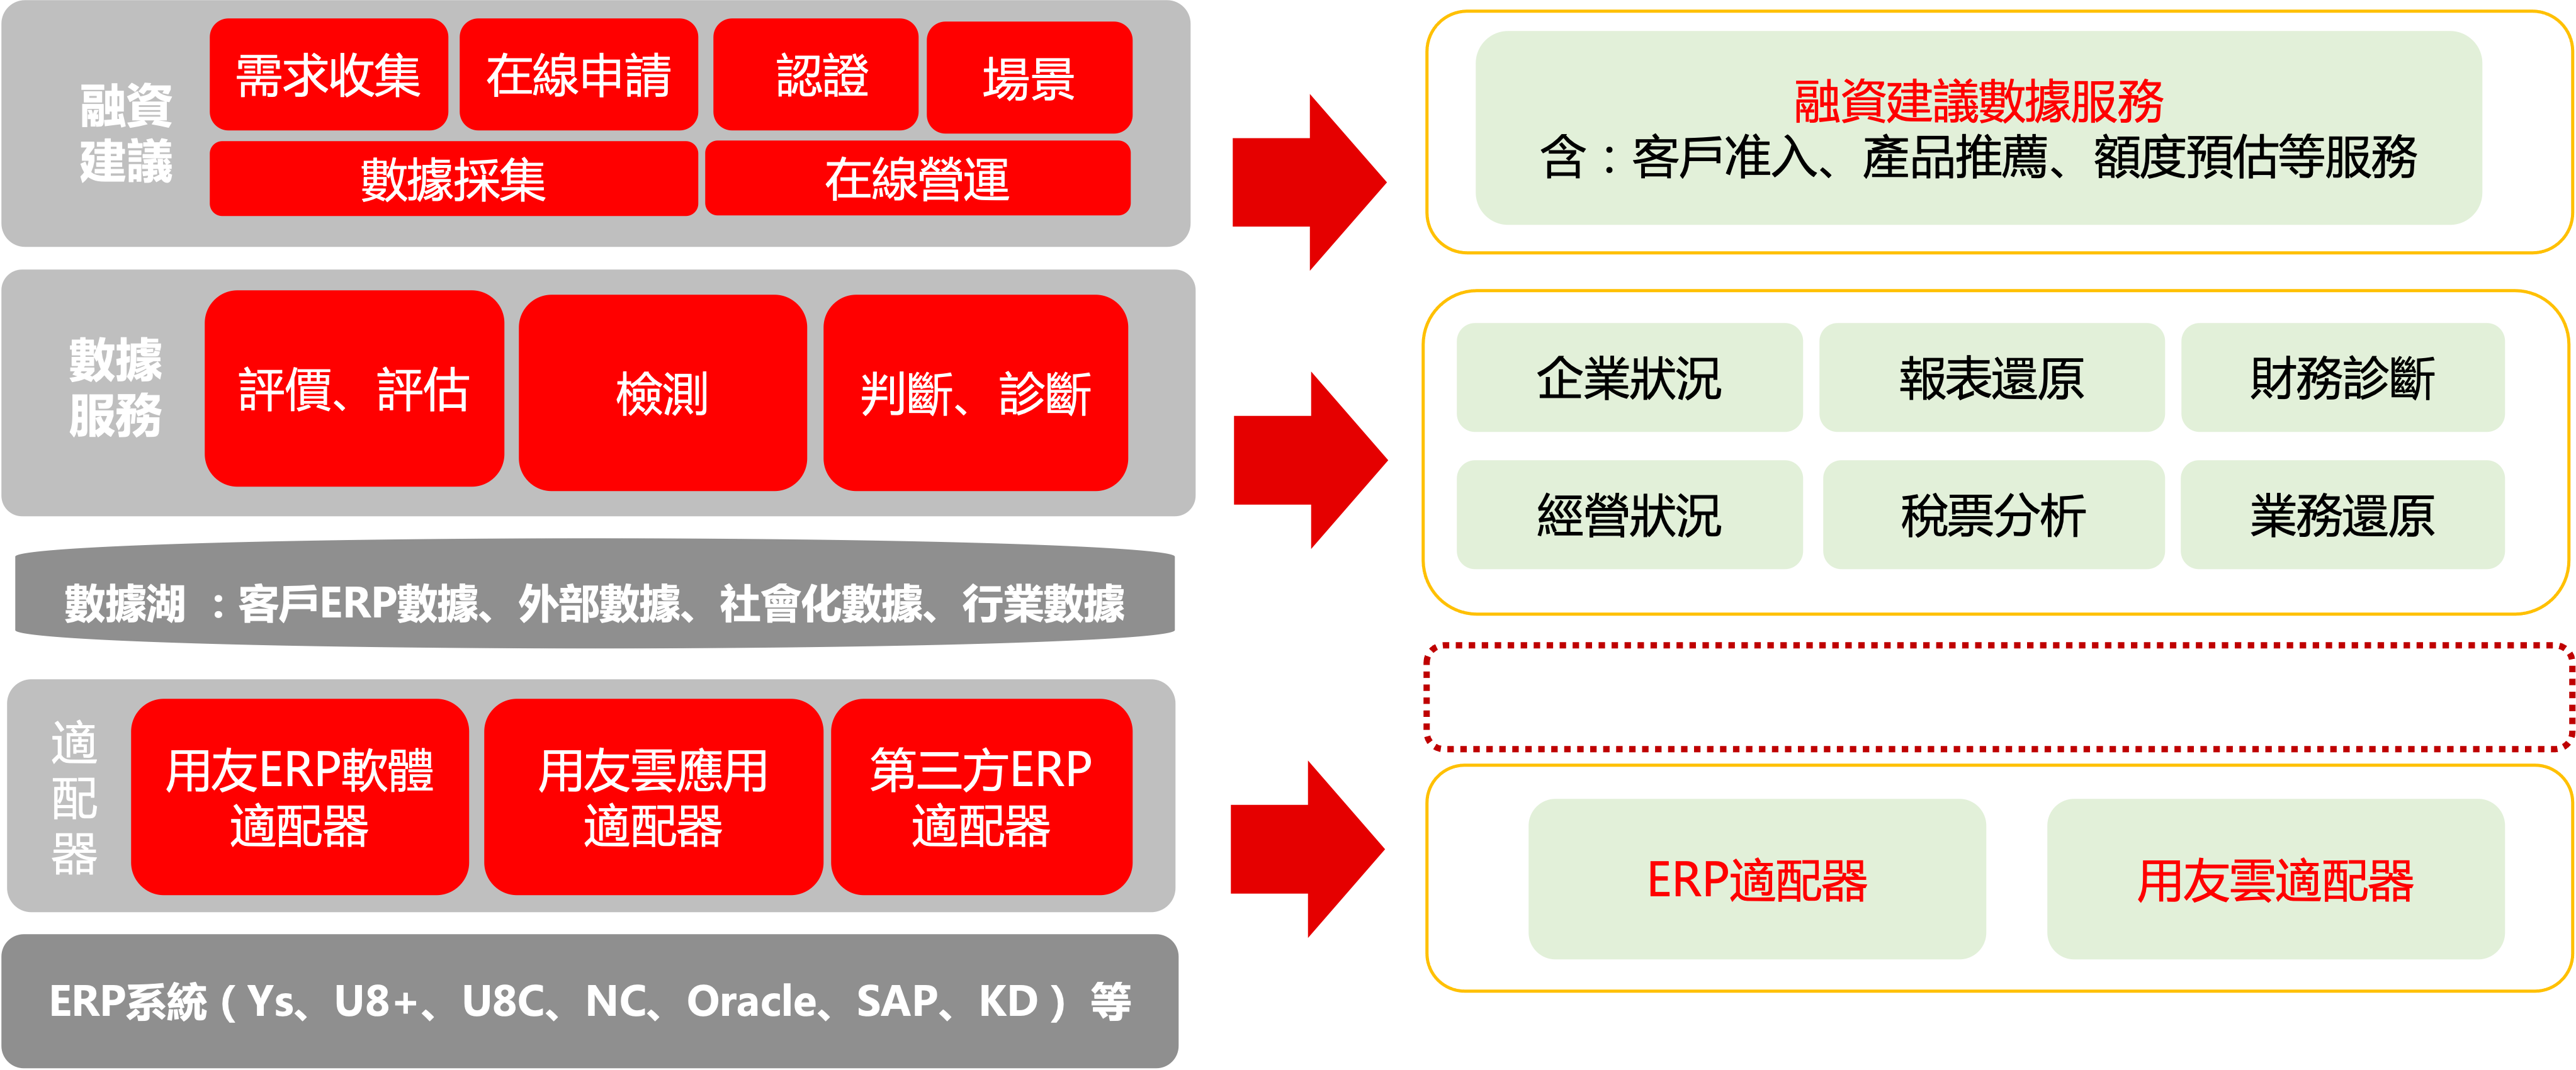 Yonyou Financial Service Industry Solution 用友金融行業方案22